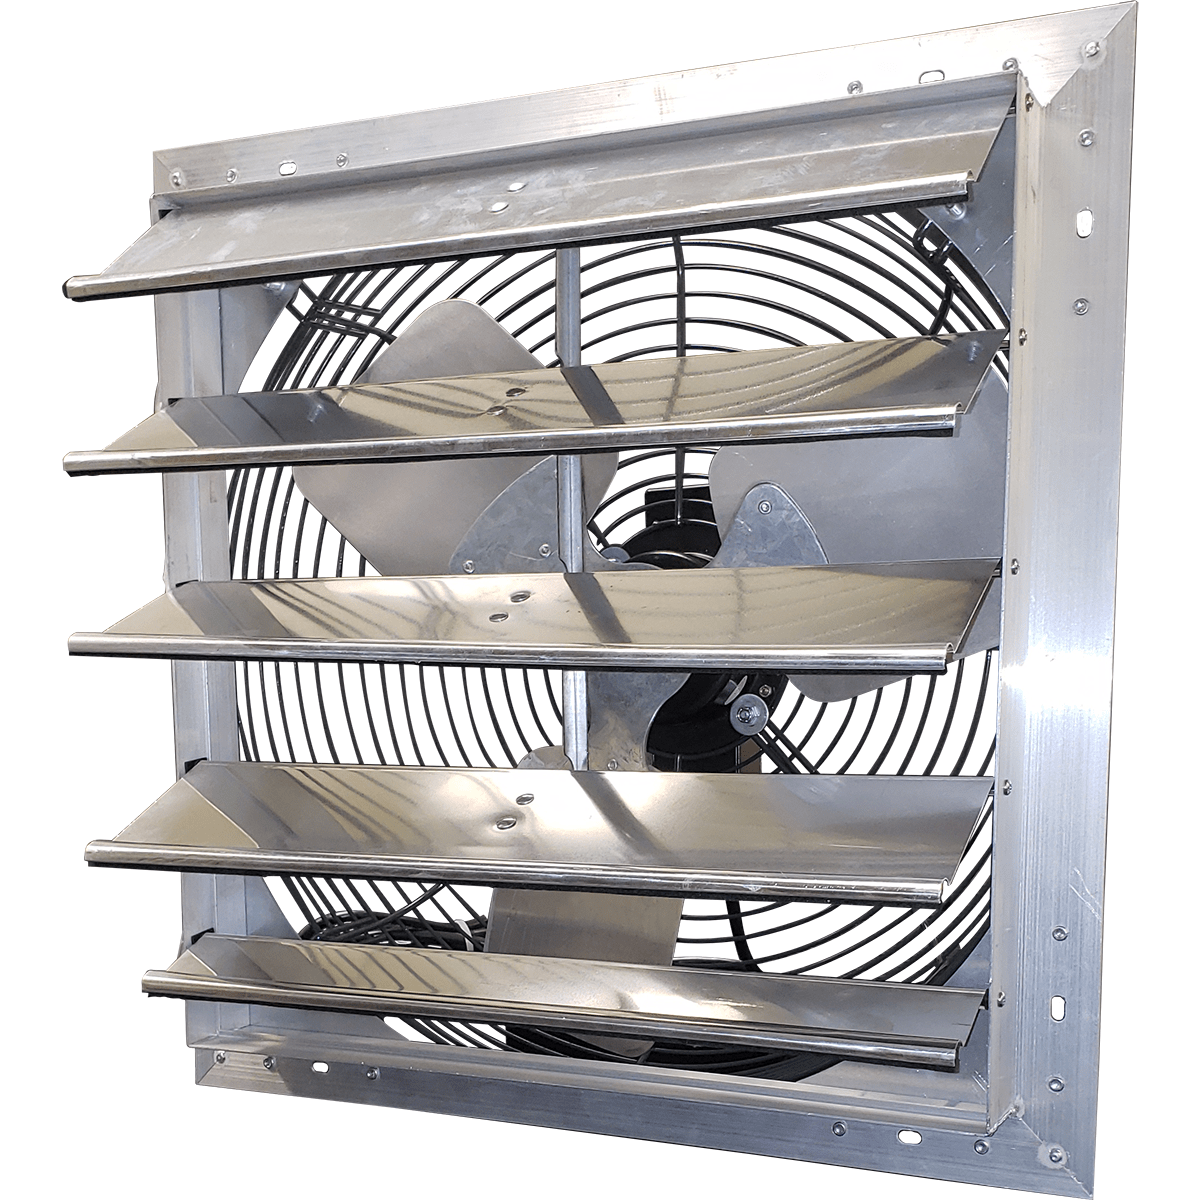 Hessaire 20 Inch Shutter Mounted Exhaust Fan - Variable Speed